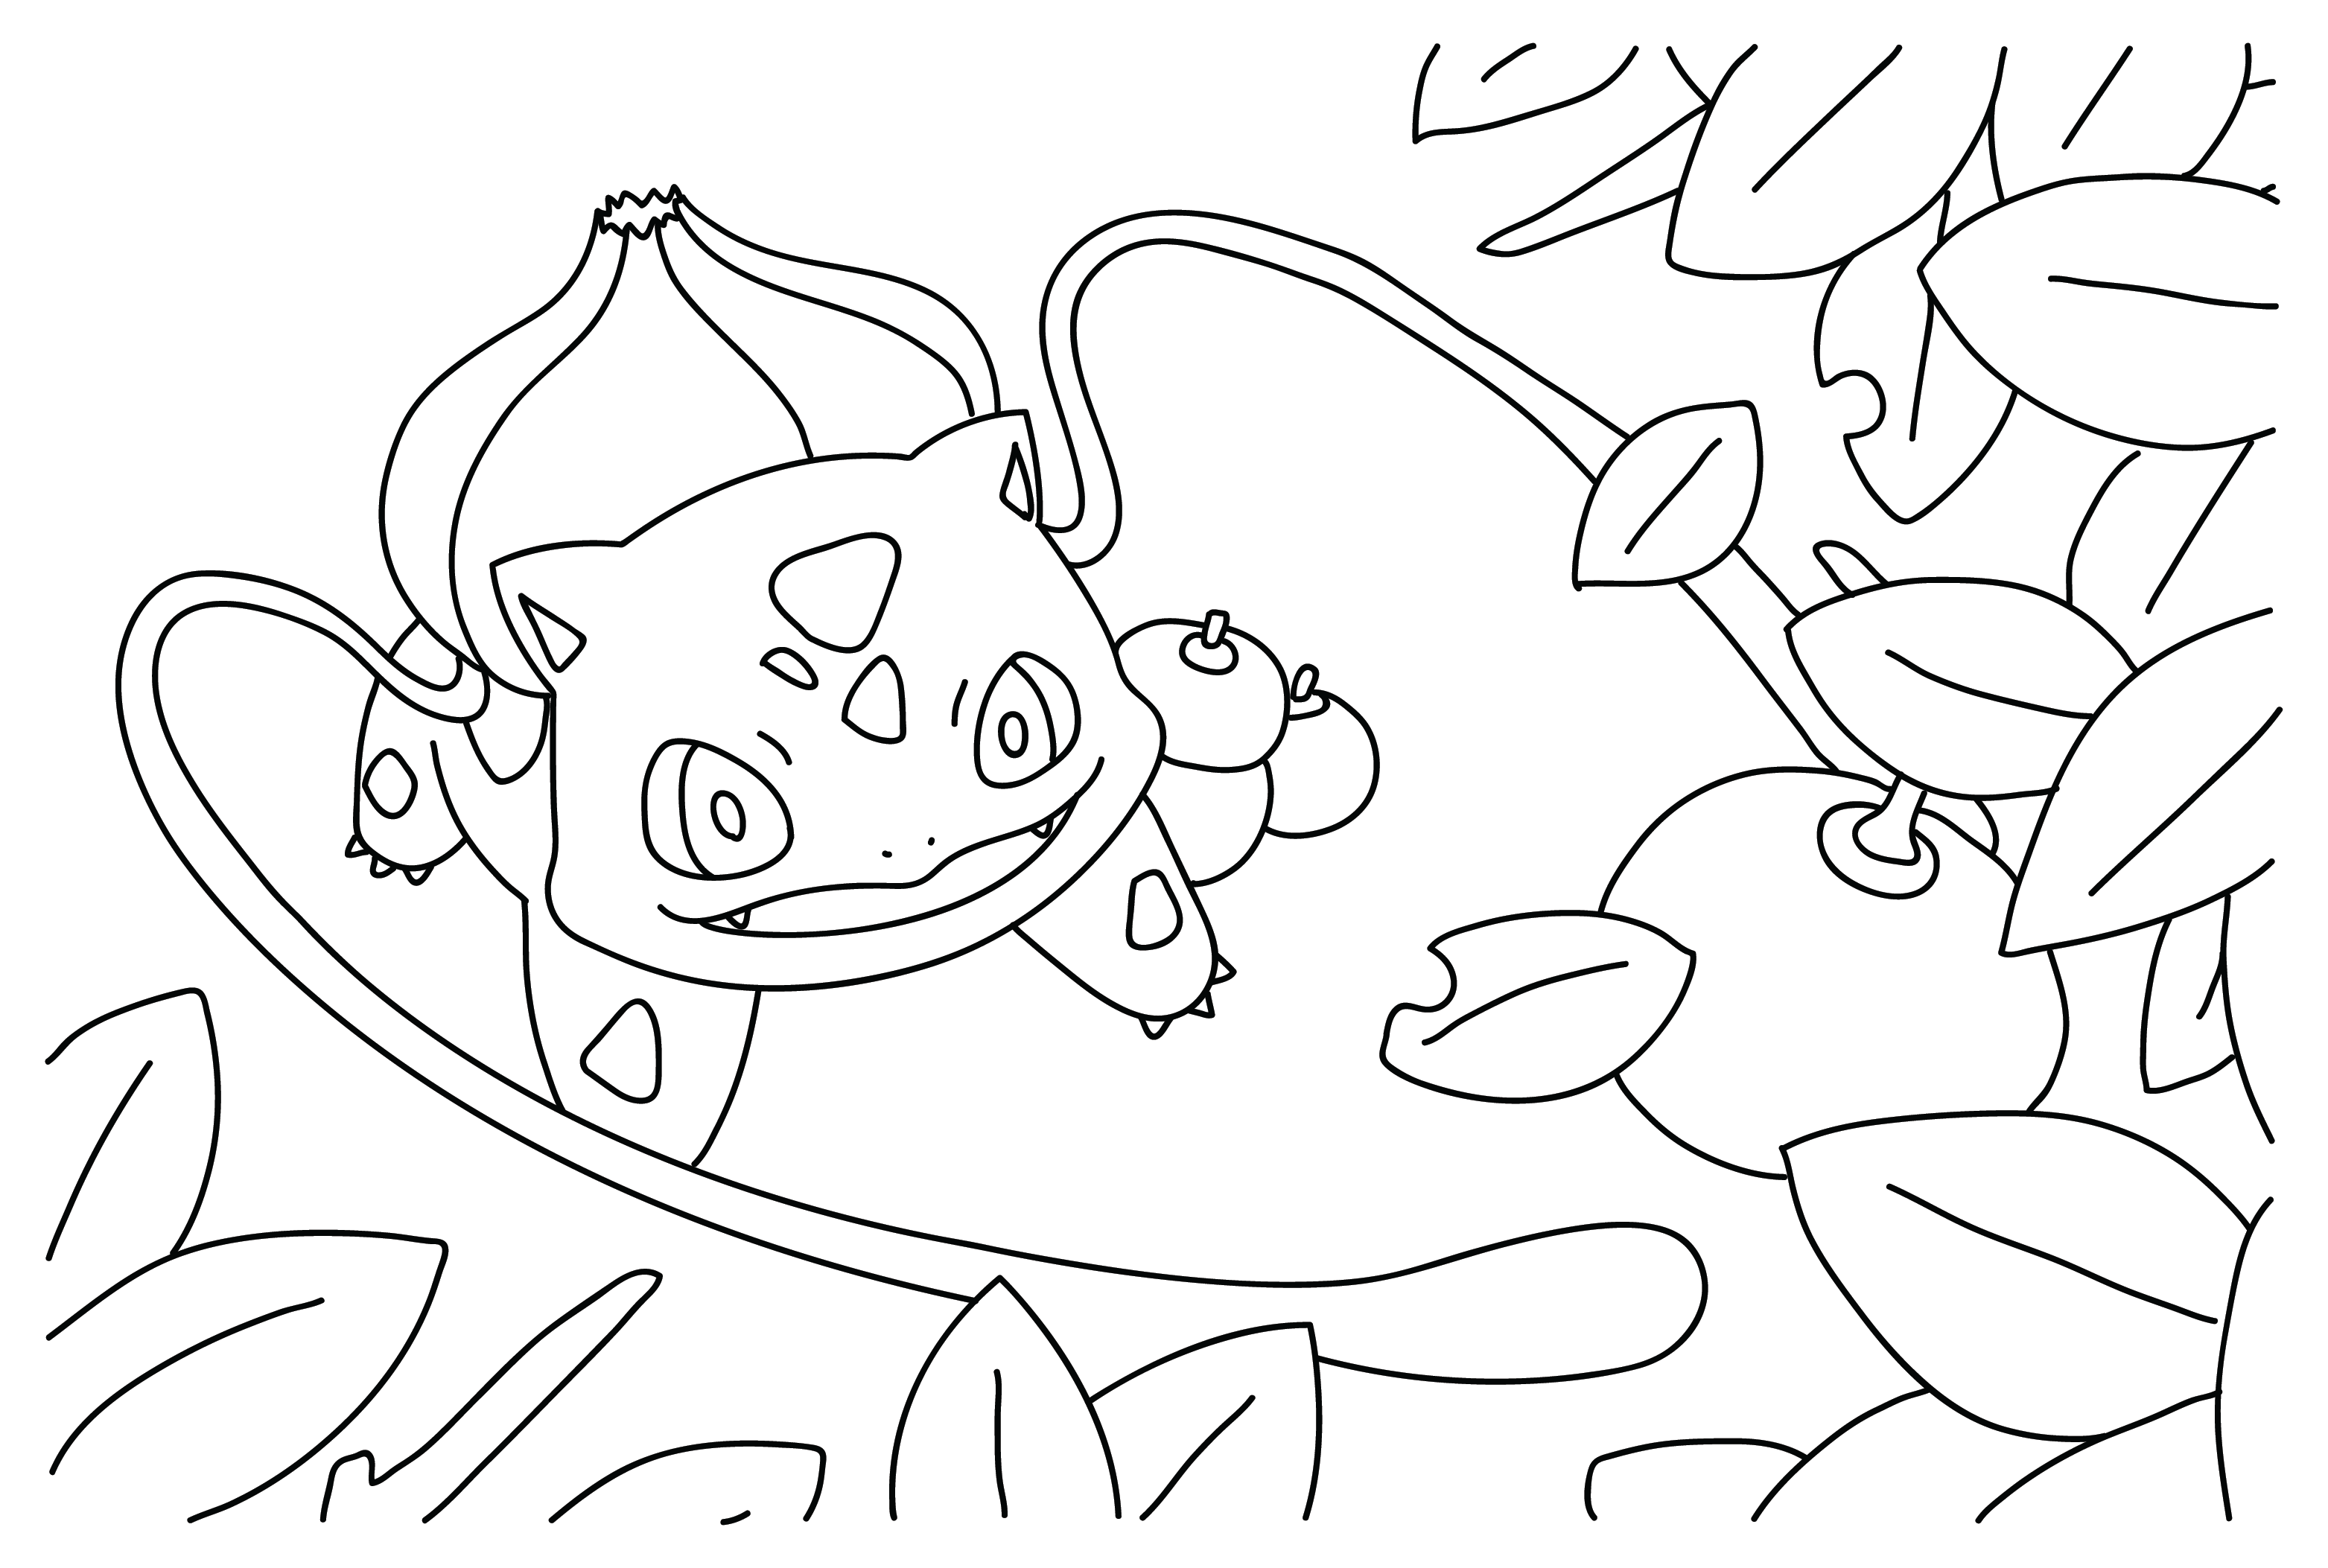 Bulbasaur Coloring Page PNG from Bulbasaur